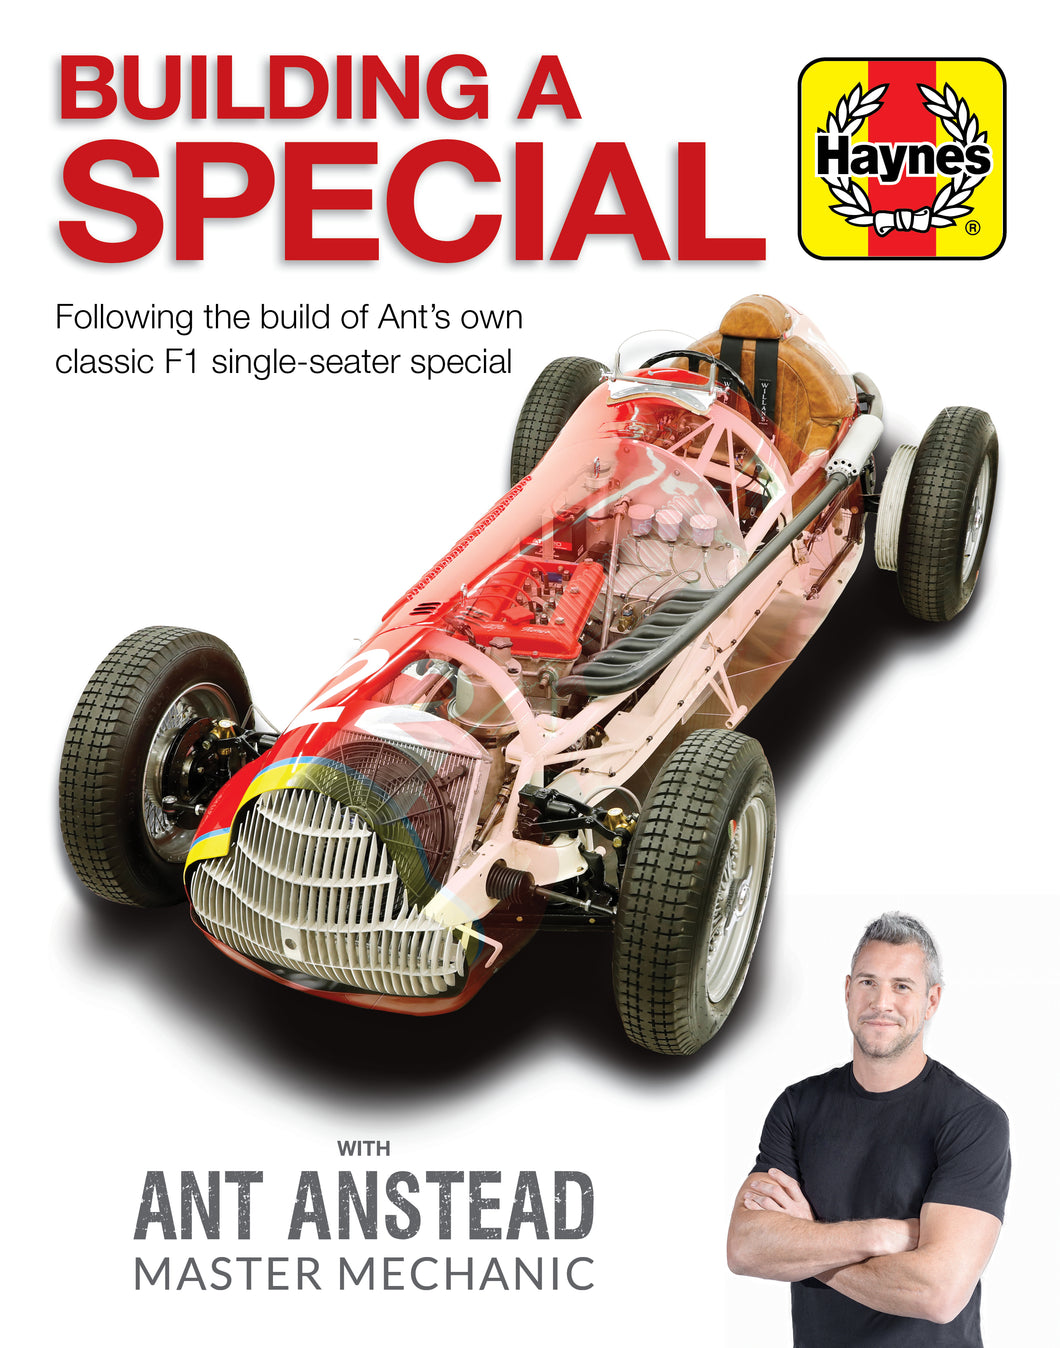 Building a Special by Ant Anstead